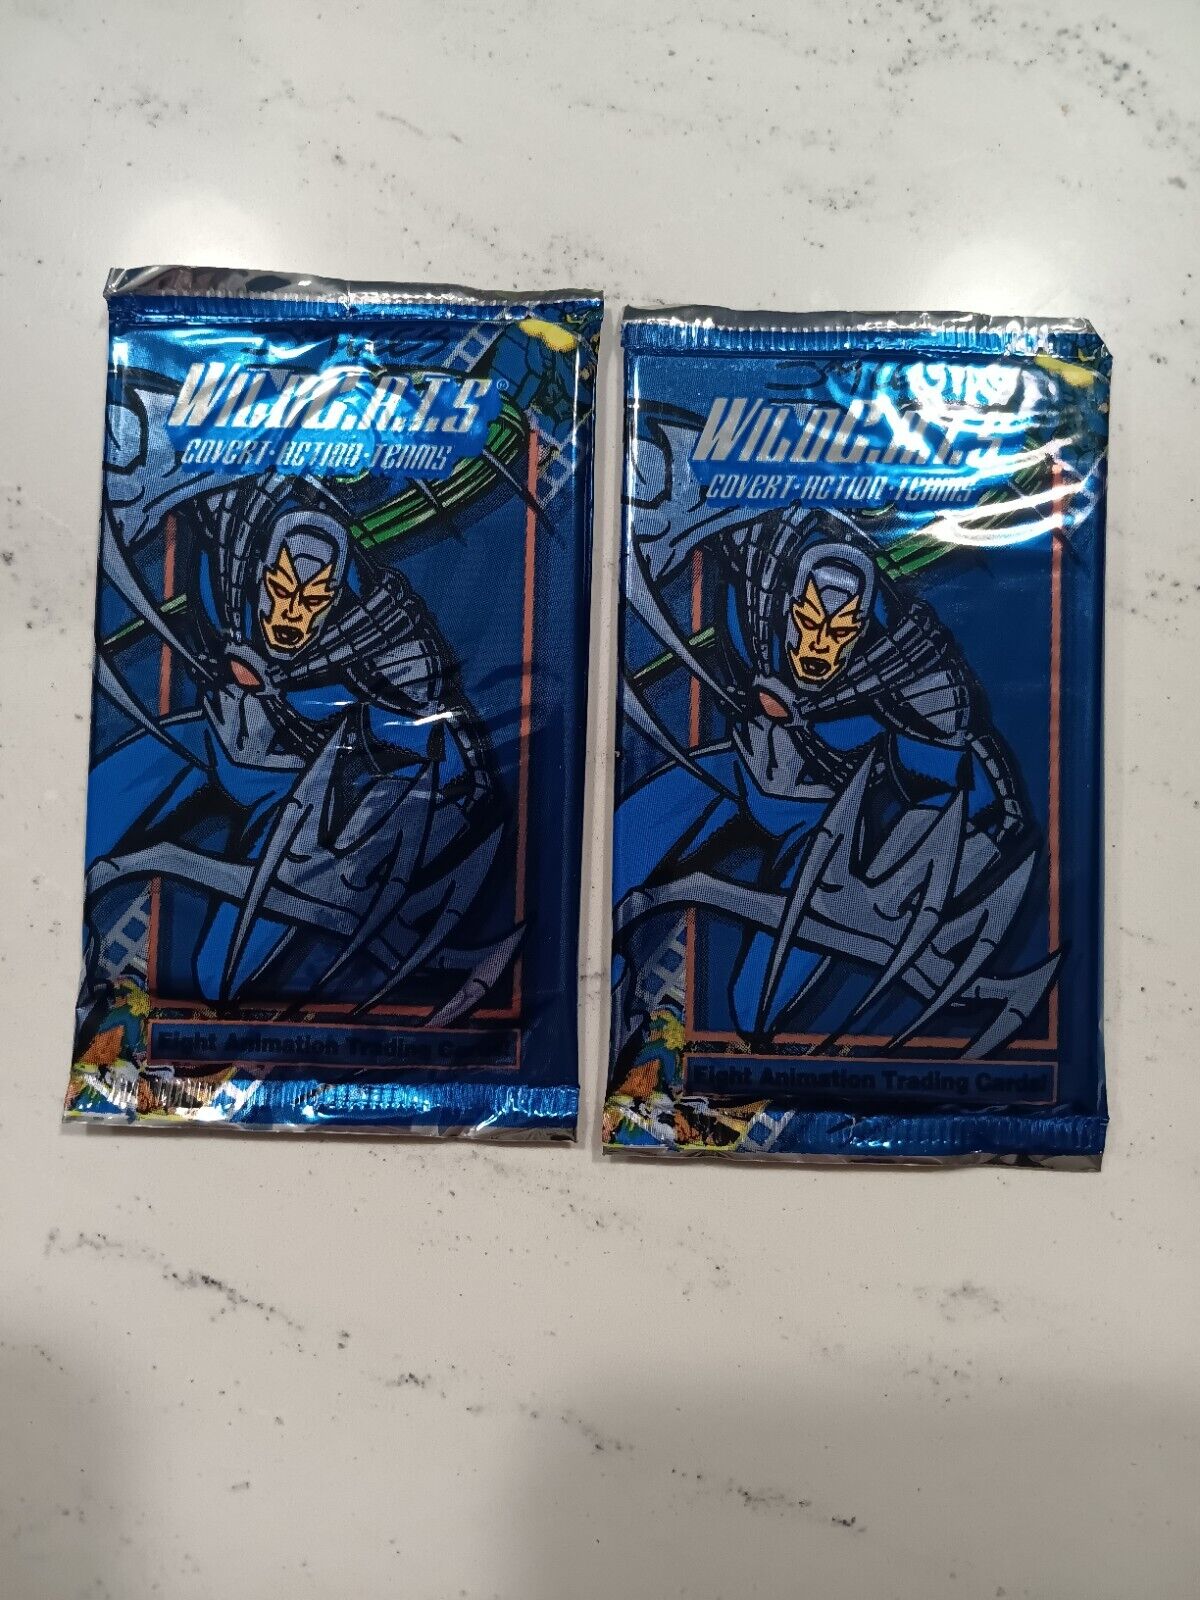 (2) - 1995 Wildcats  Covert Action Teams Sealed  Cards Packs  T341